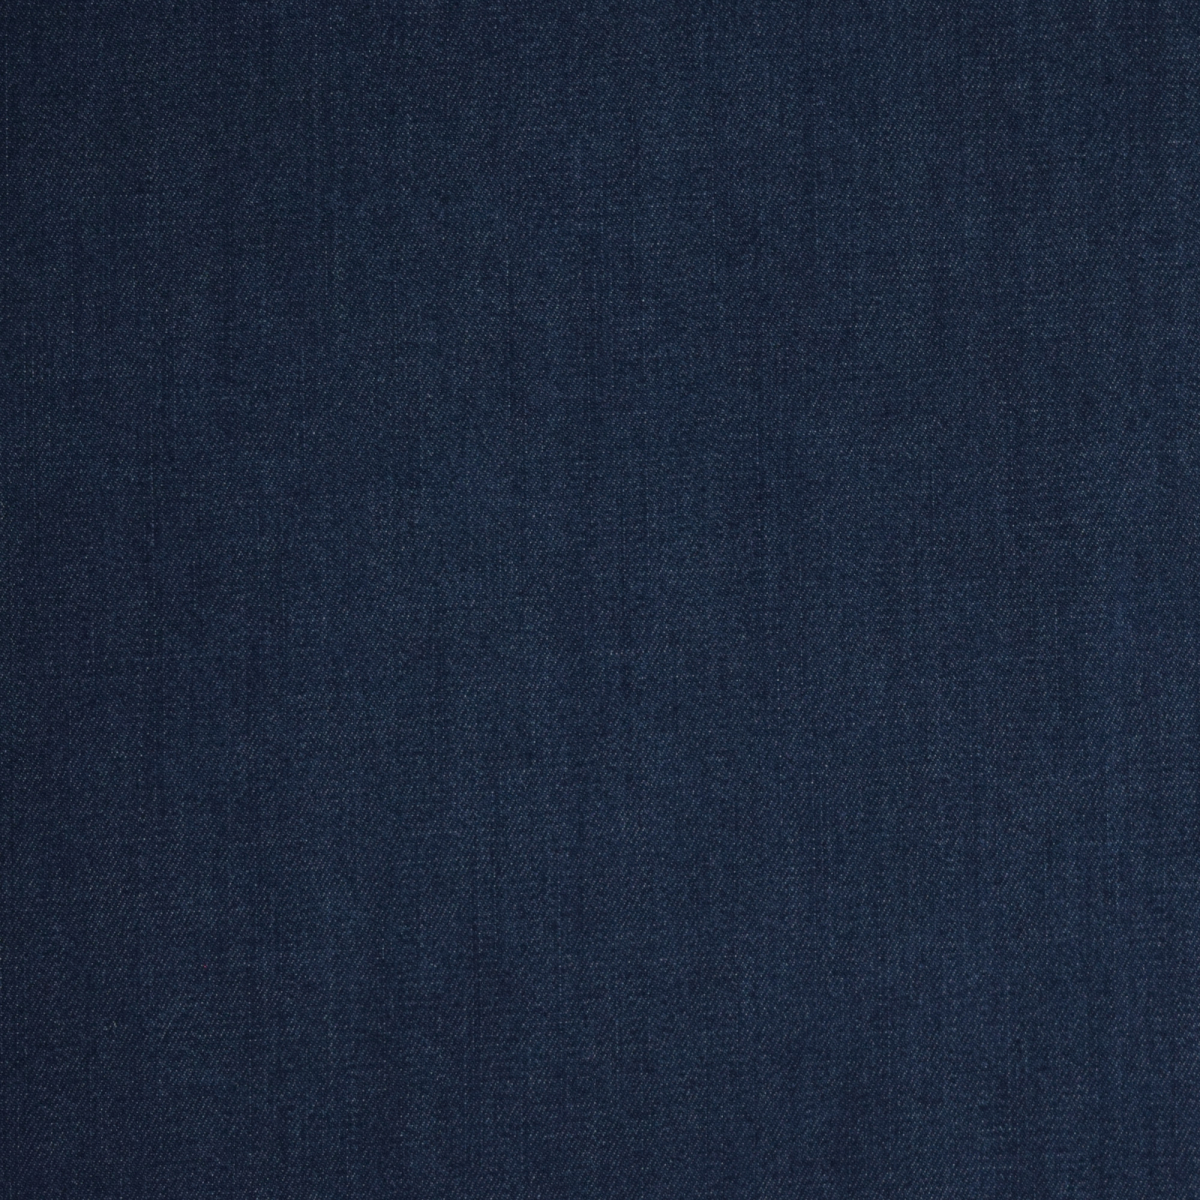 Stretch Denim Fabric, Pattern : Plain, Width : 42 Inches at Best Price in  Ahmedabad